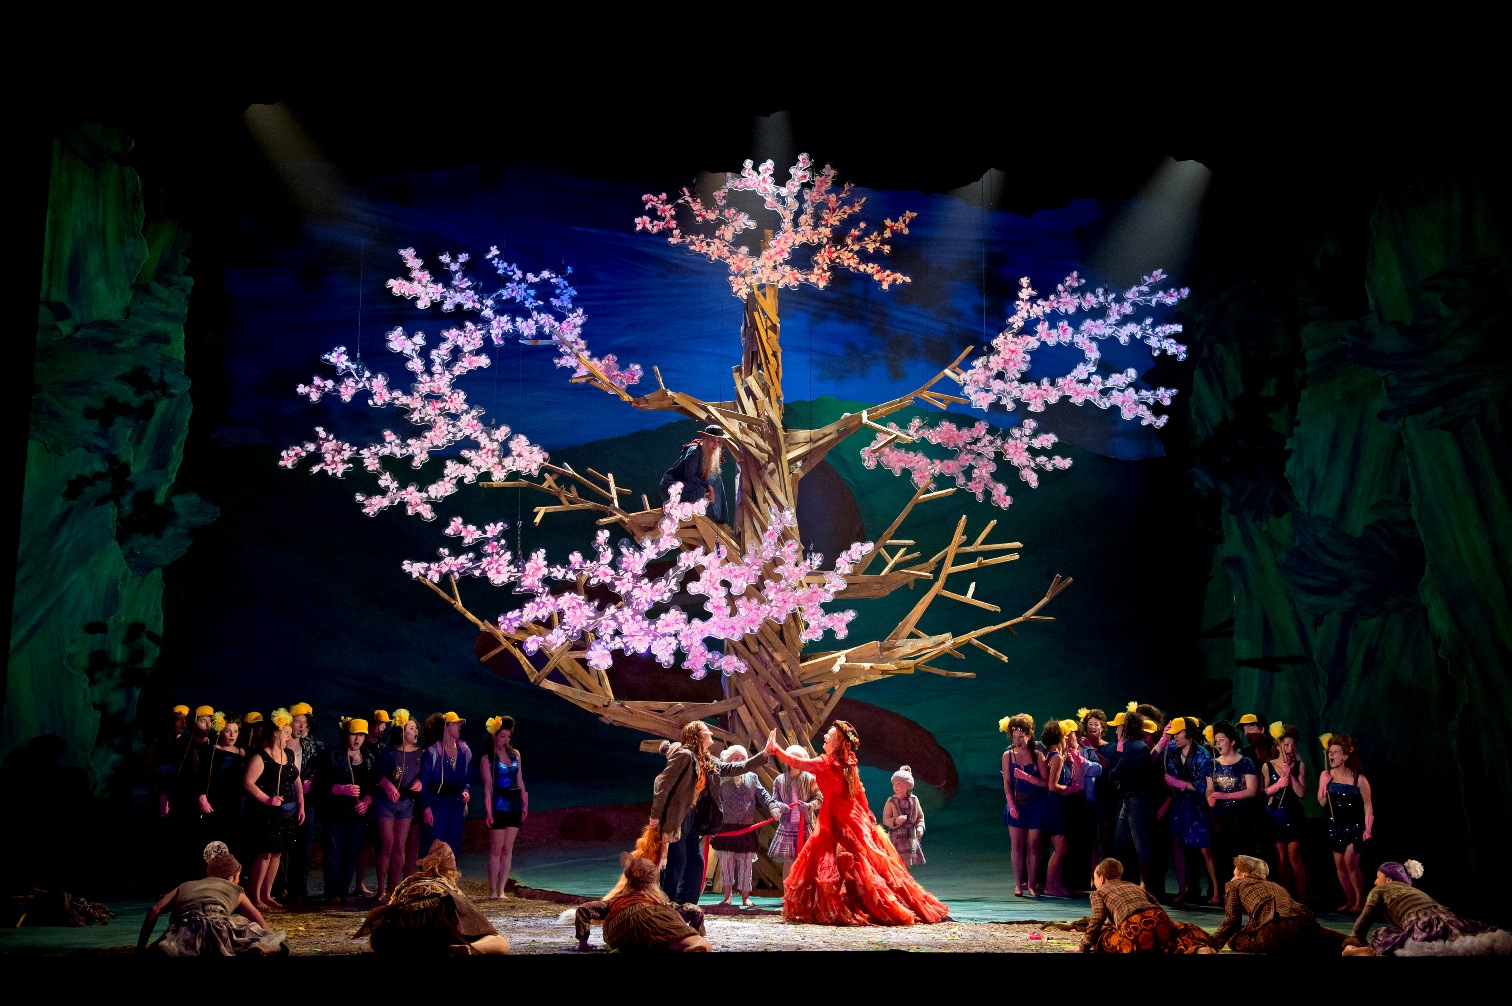 The wedding scene in the Glyndebourne production of The Cunning Little Vixen